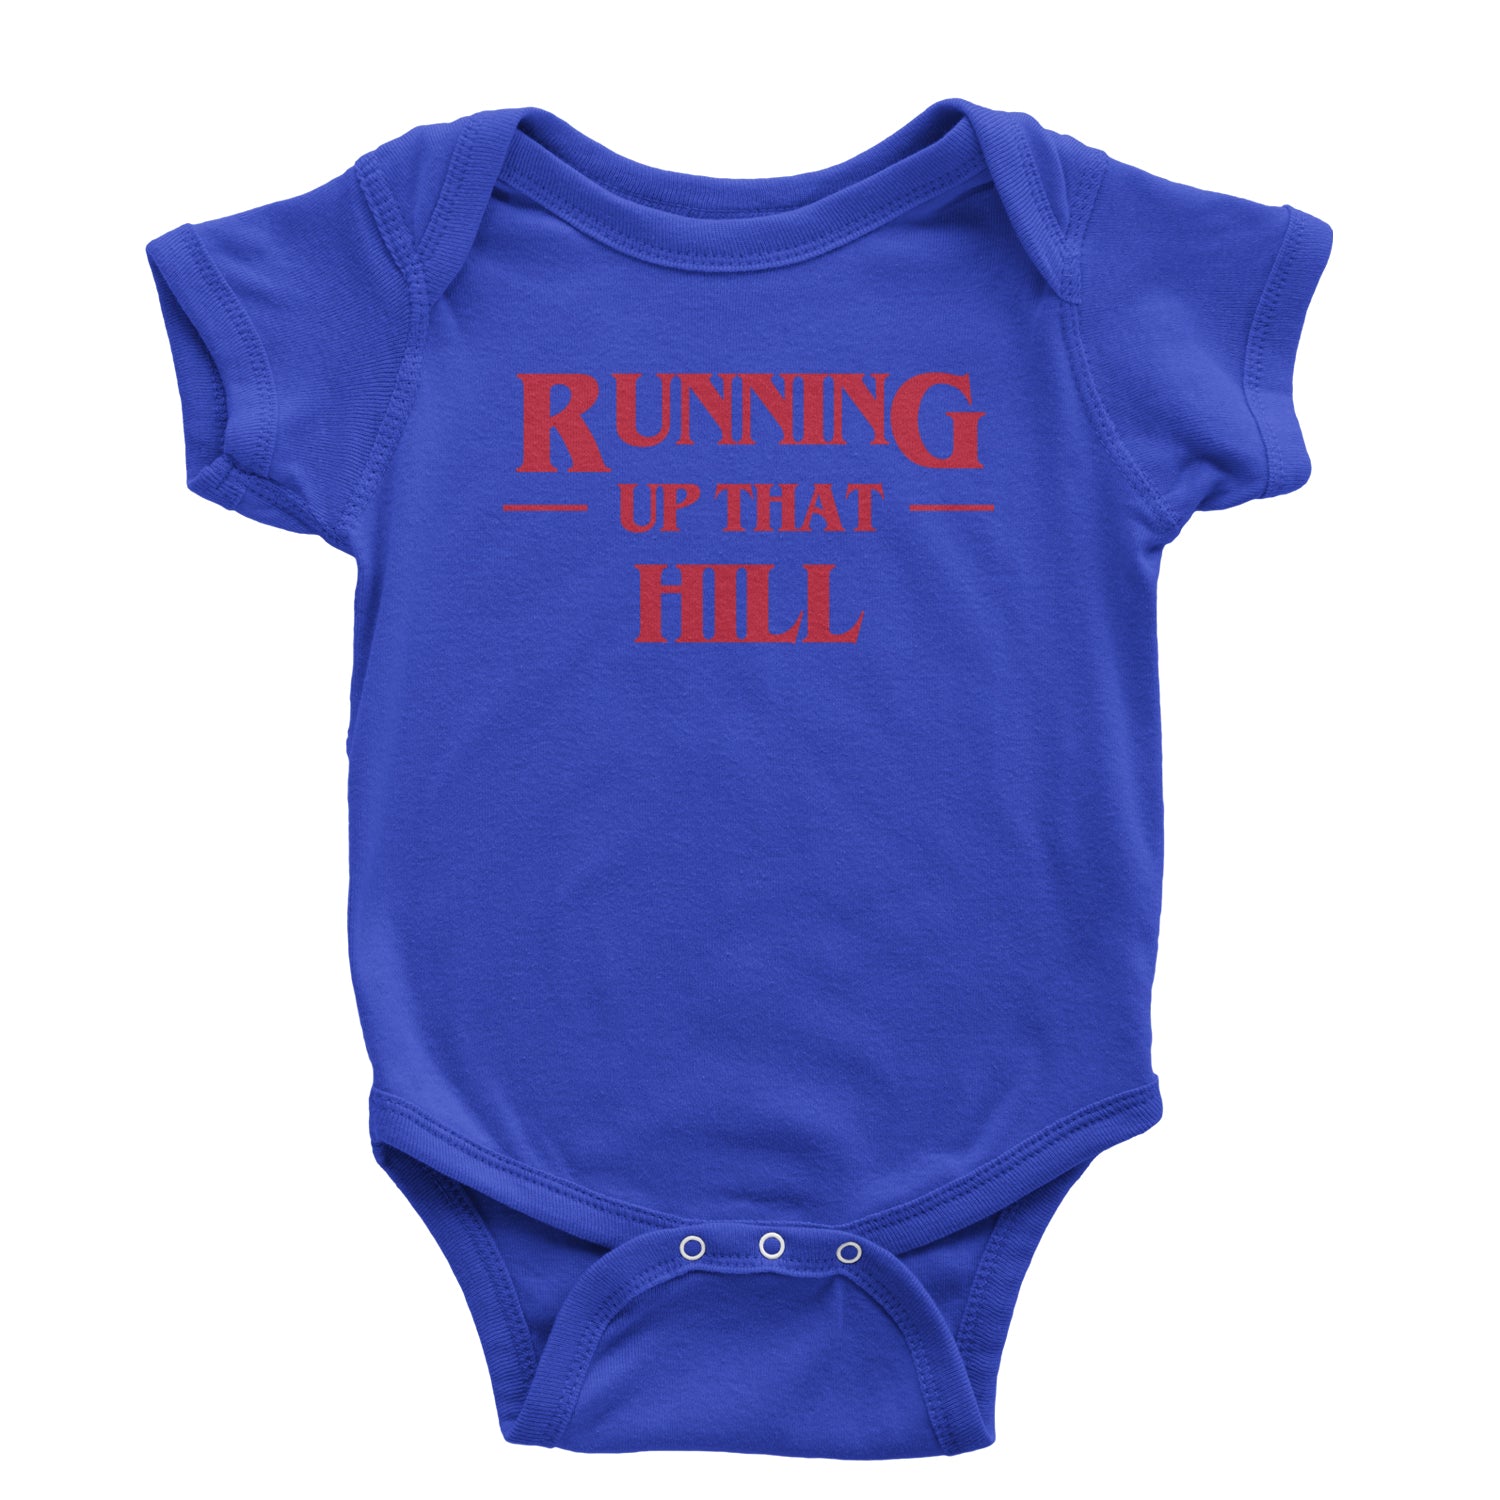 Running Up That Hill Infant One-Piece Romper Bodysuit and Toddler T-shirt 4, don’t, eleven, four, friends, lie, season by Expression Tees